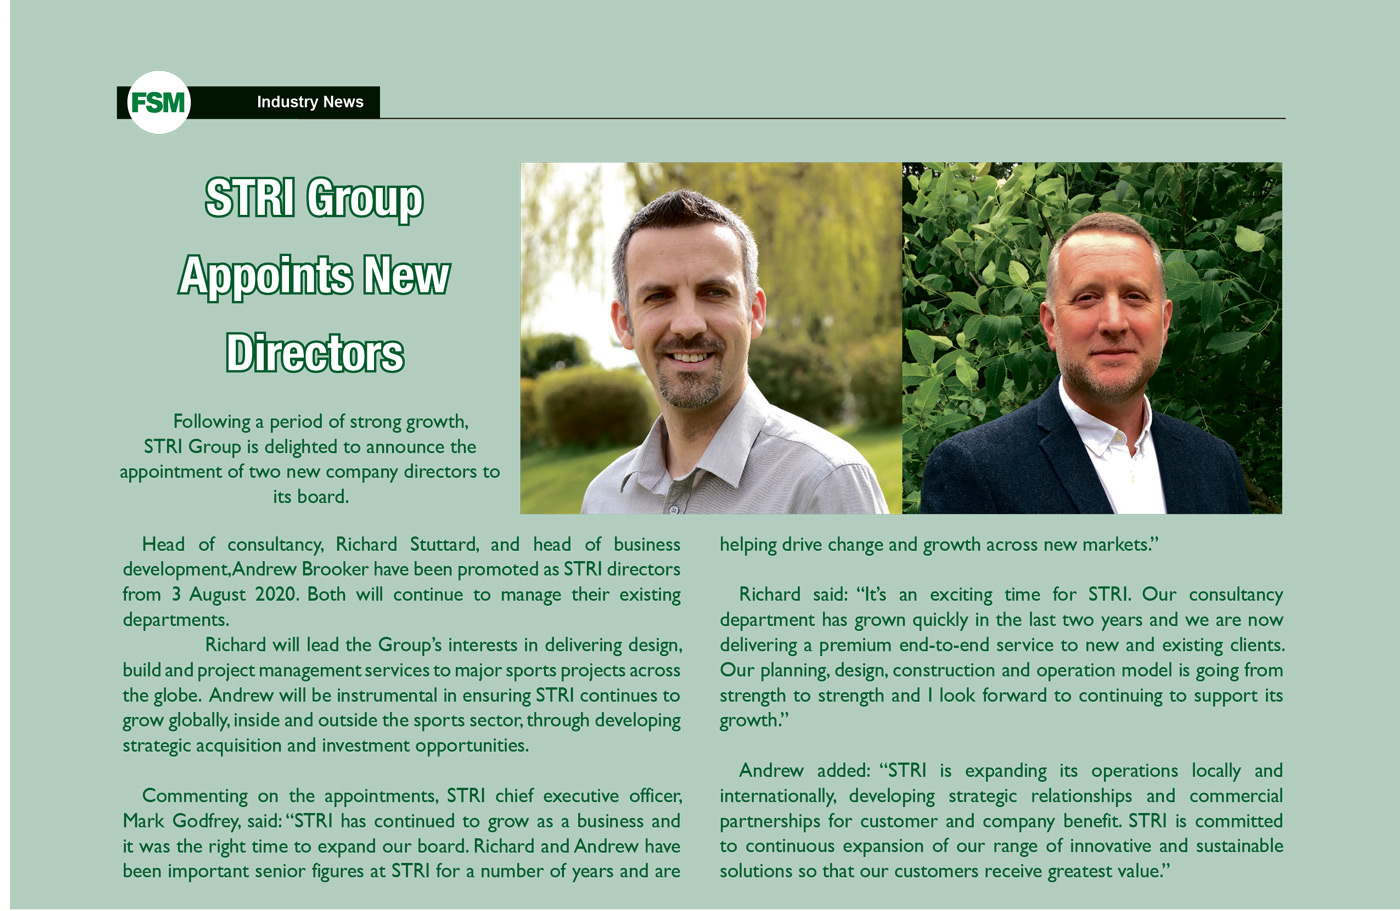 STRI Group Appoints New Directors